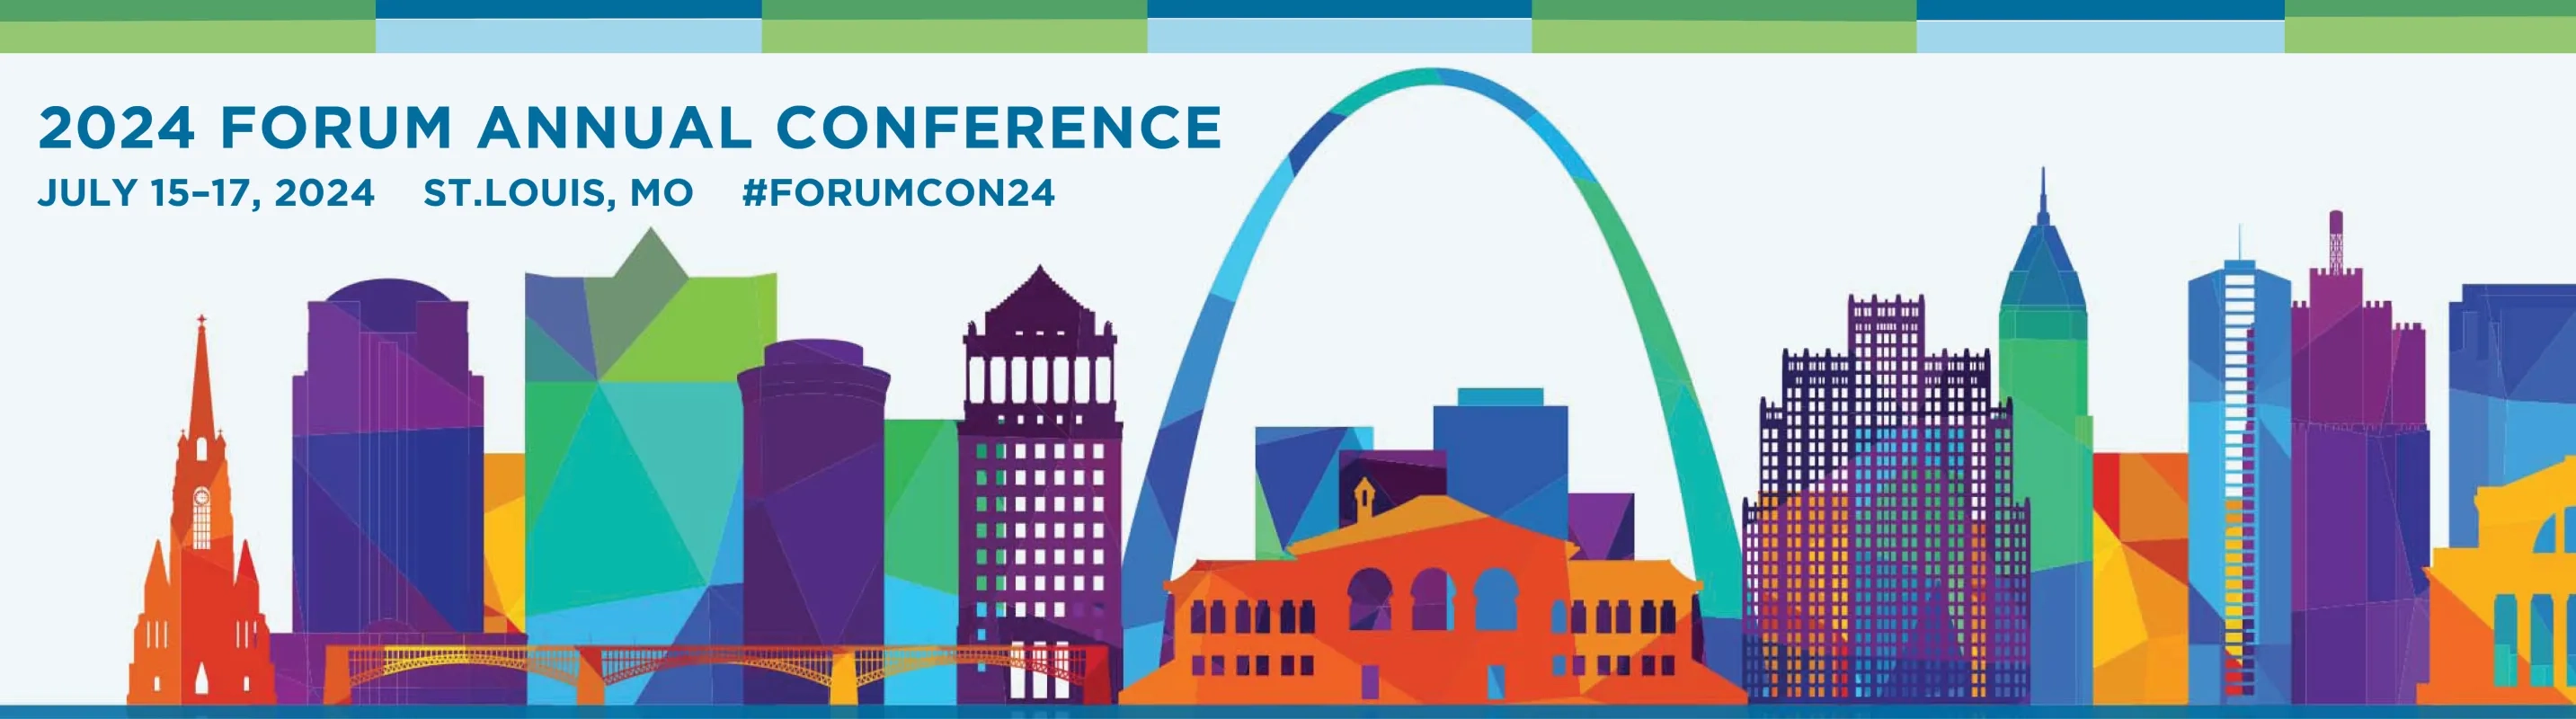 2024 Forum Annual Conference with St. Louis Skyline